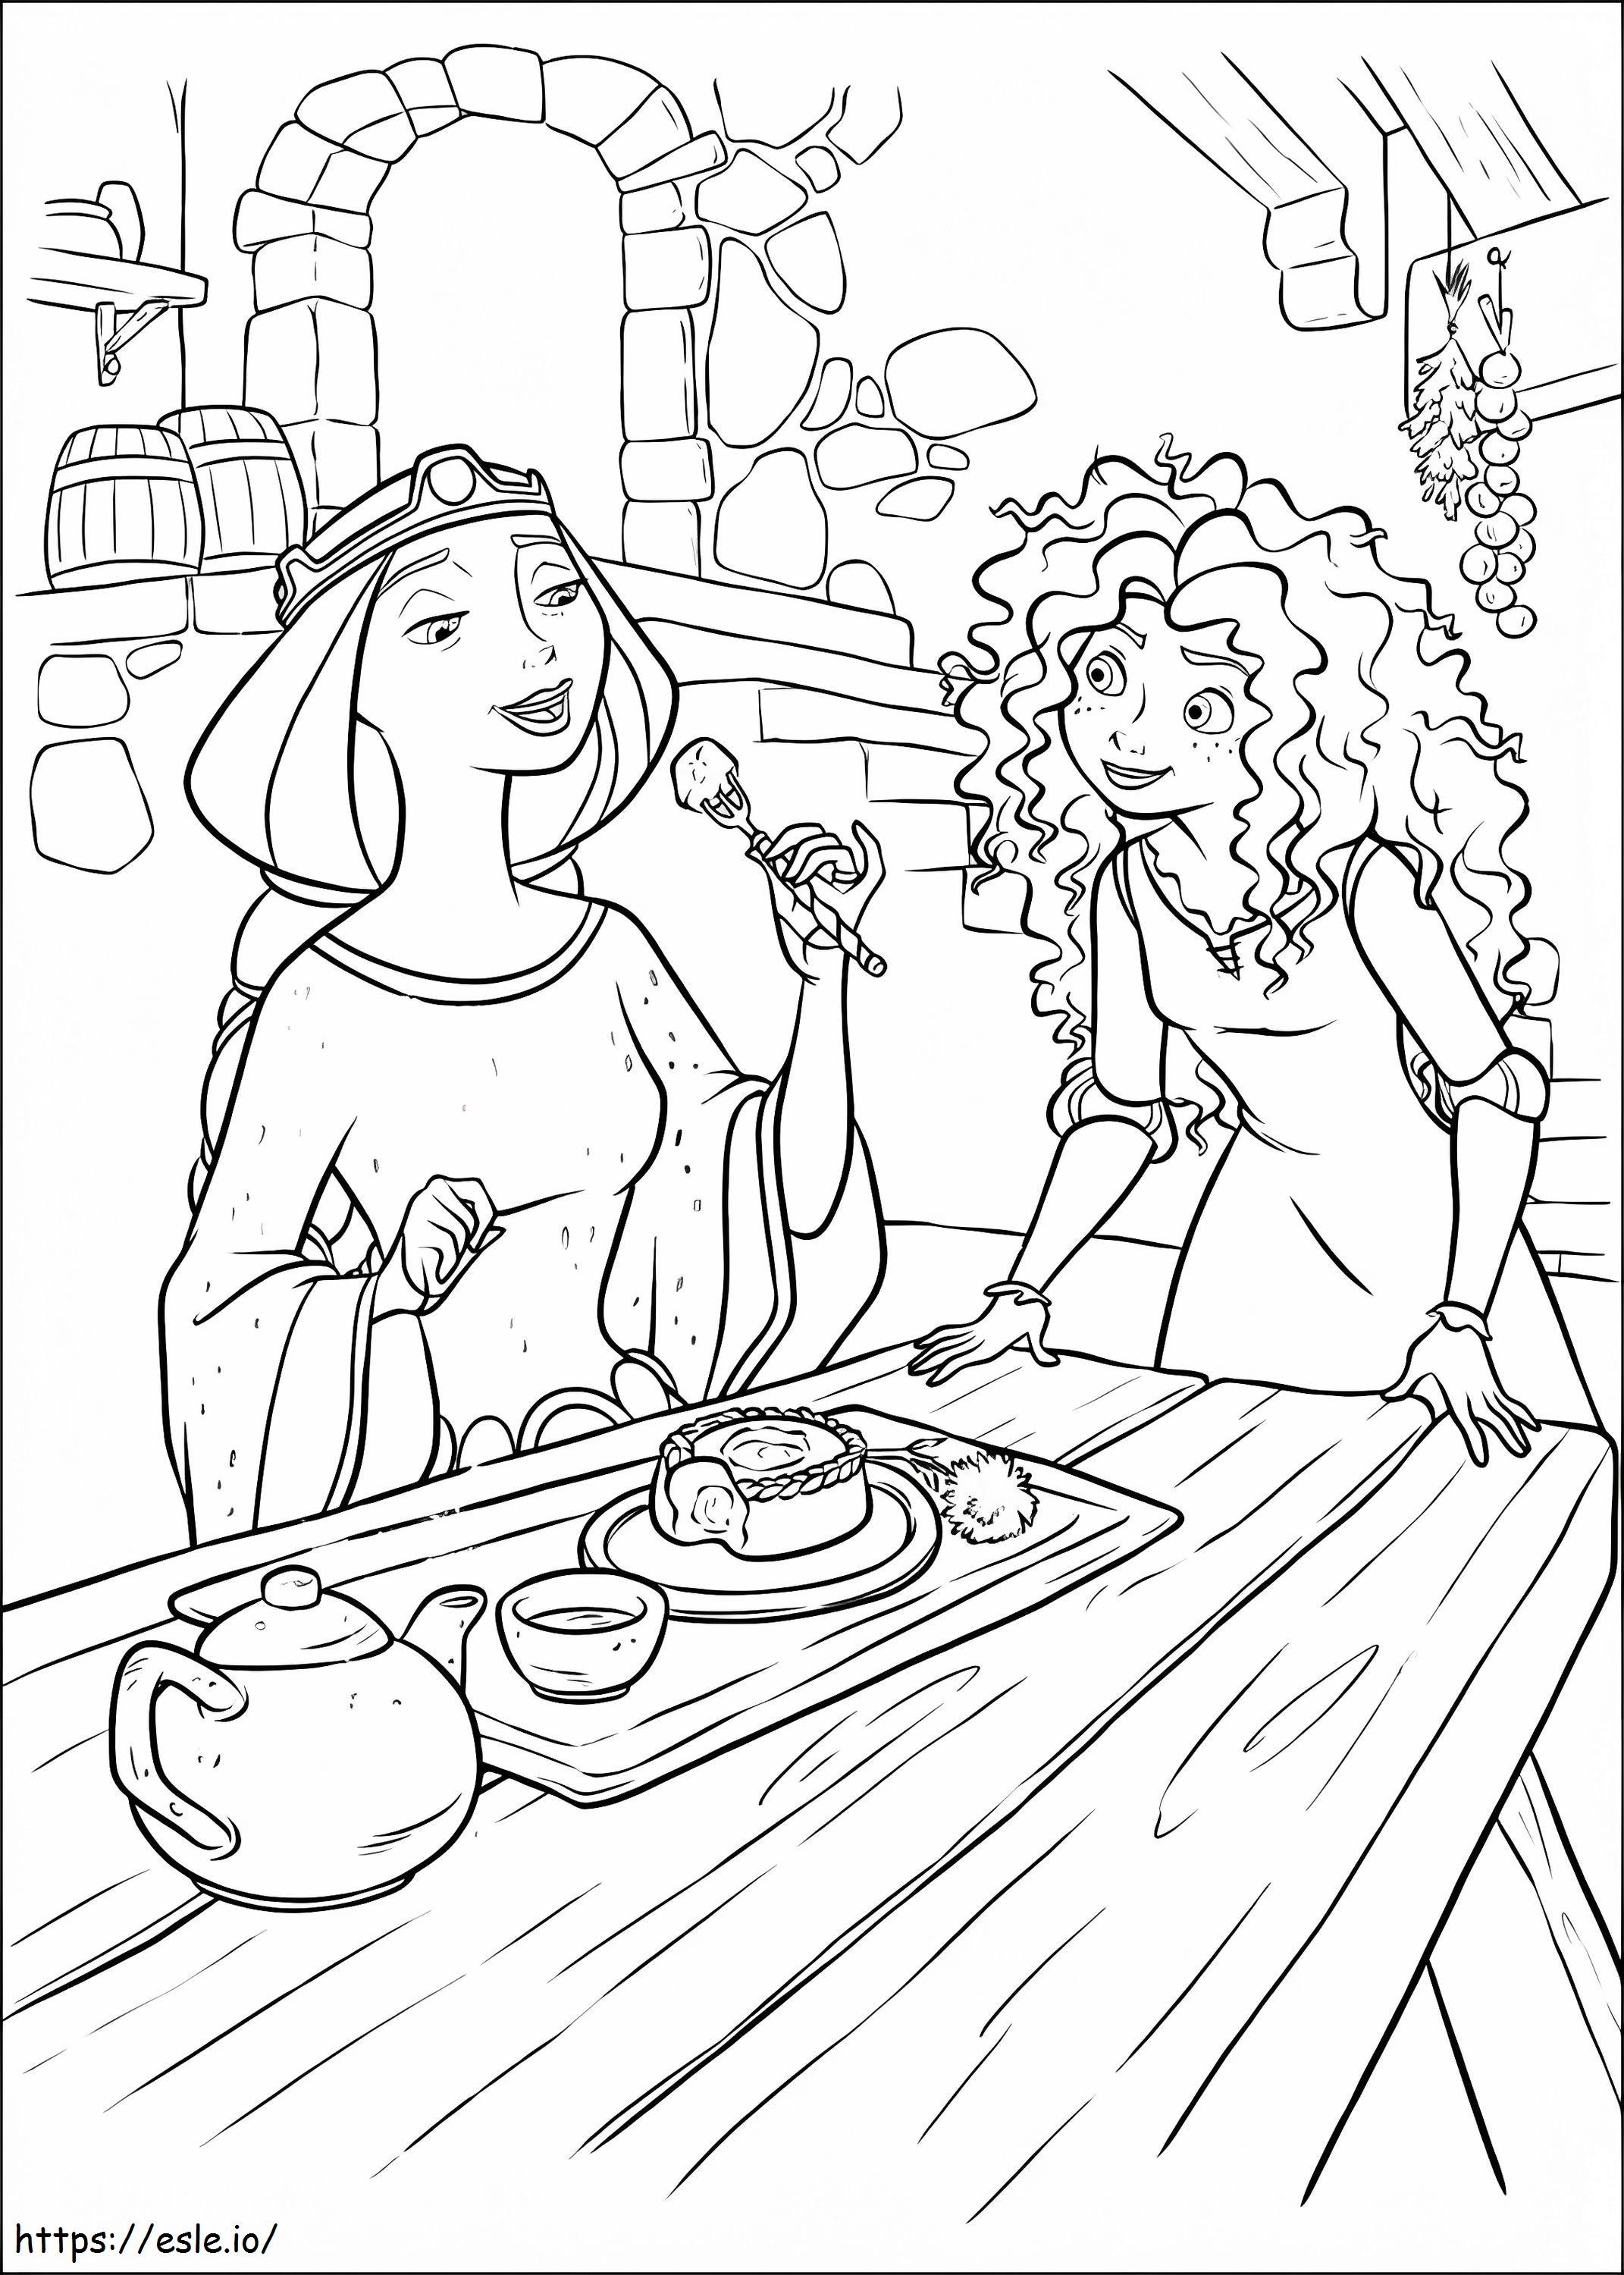 1534217999 Elinor Eating With Merida A4 coloring page